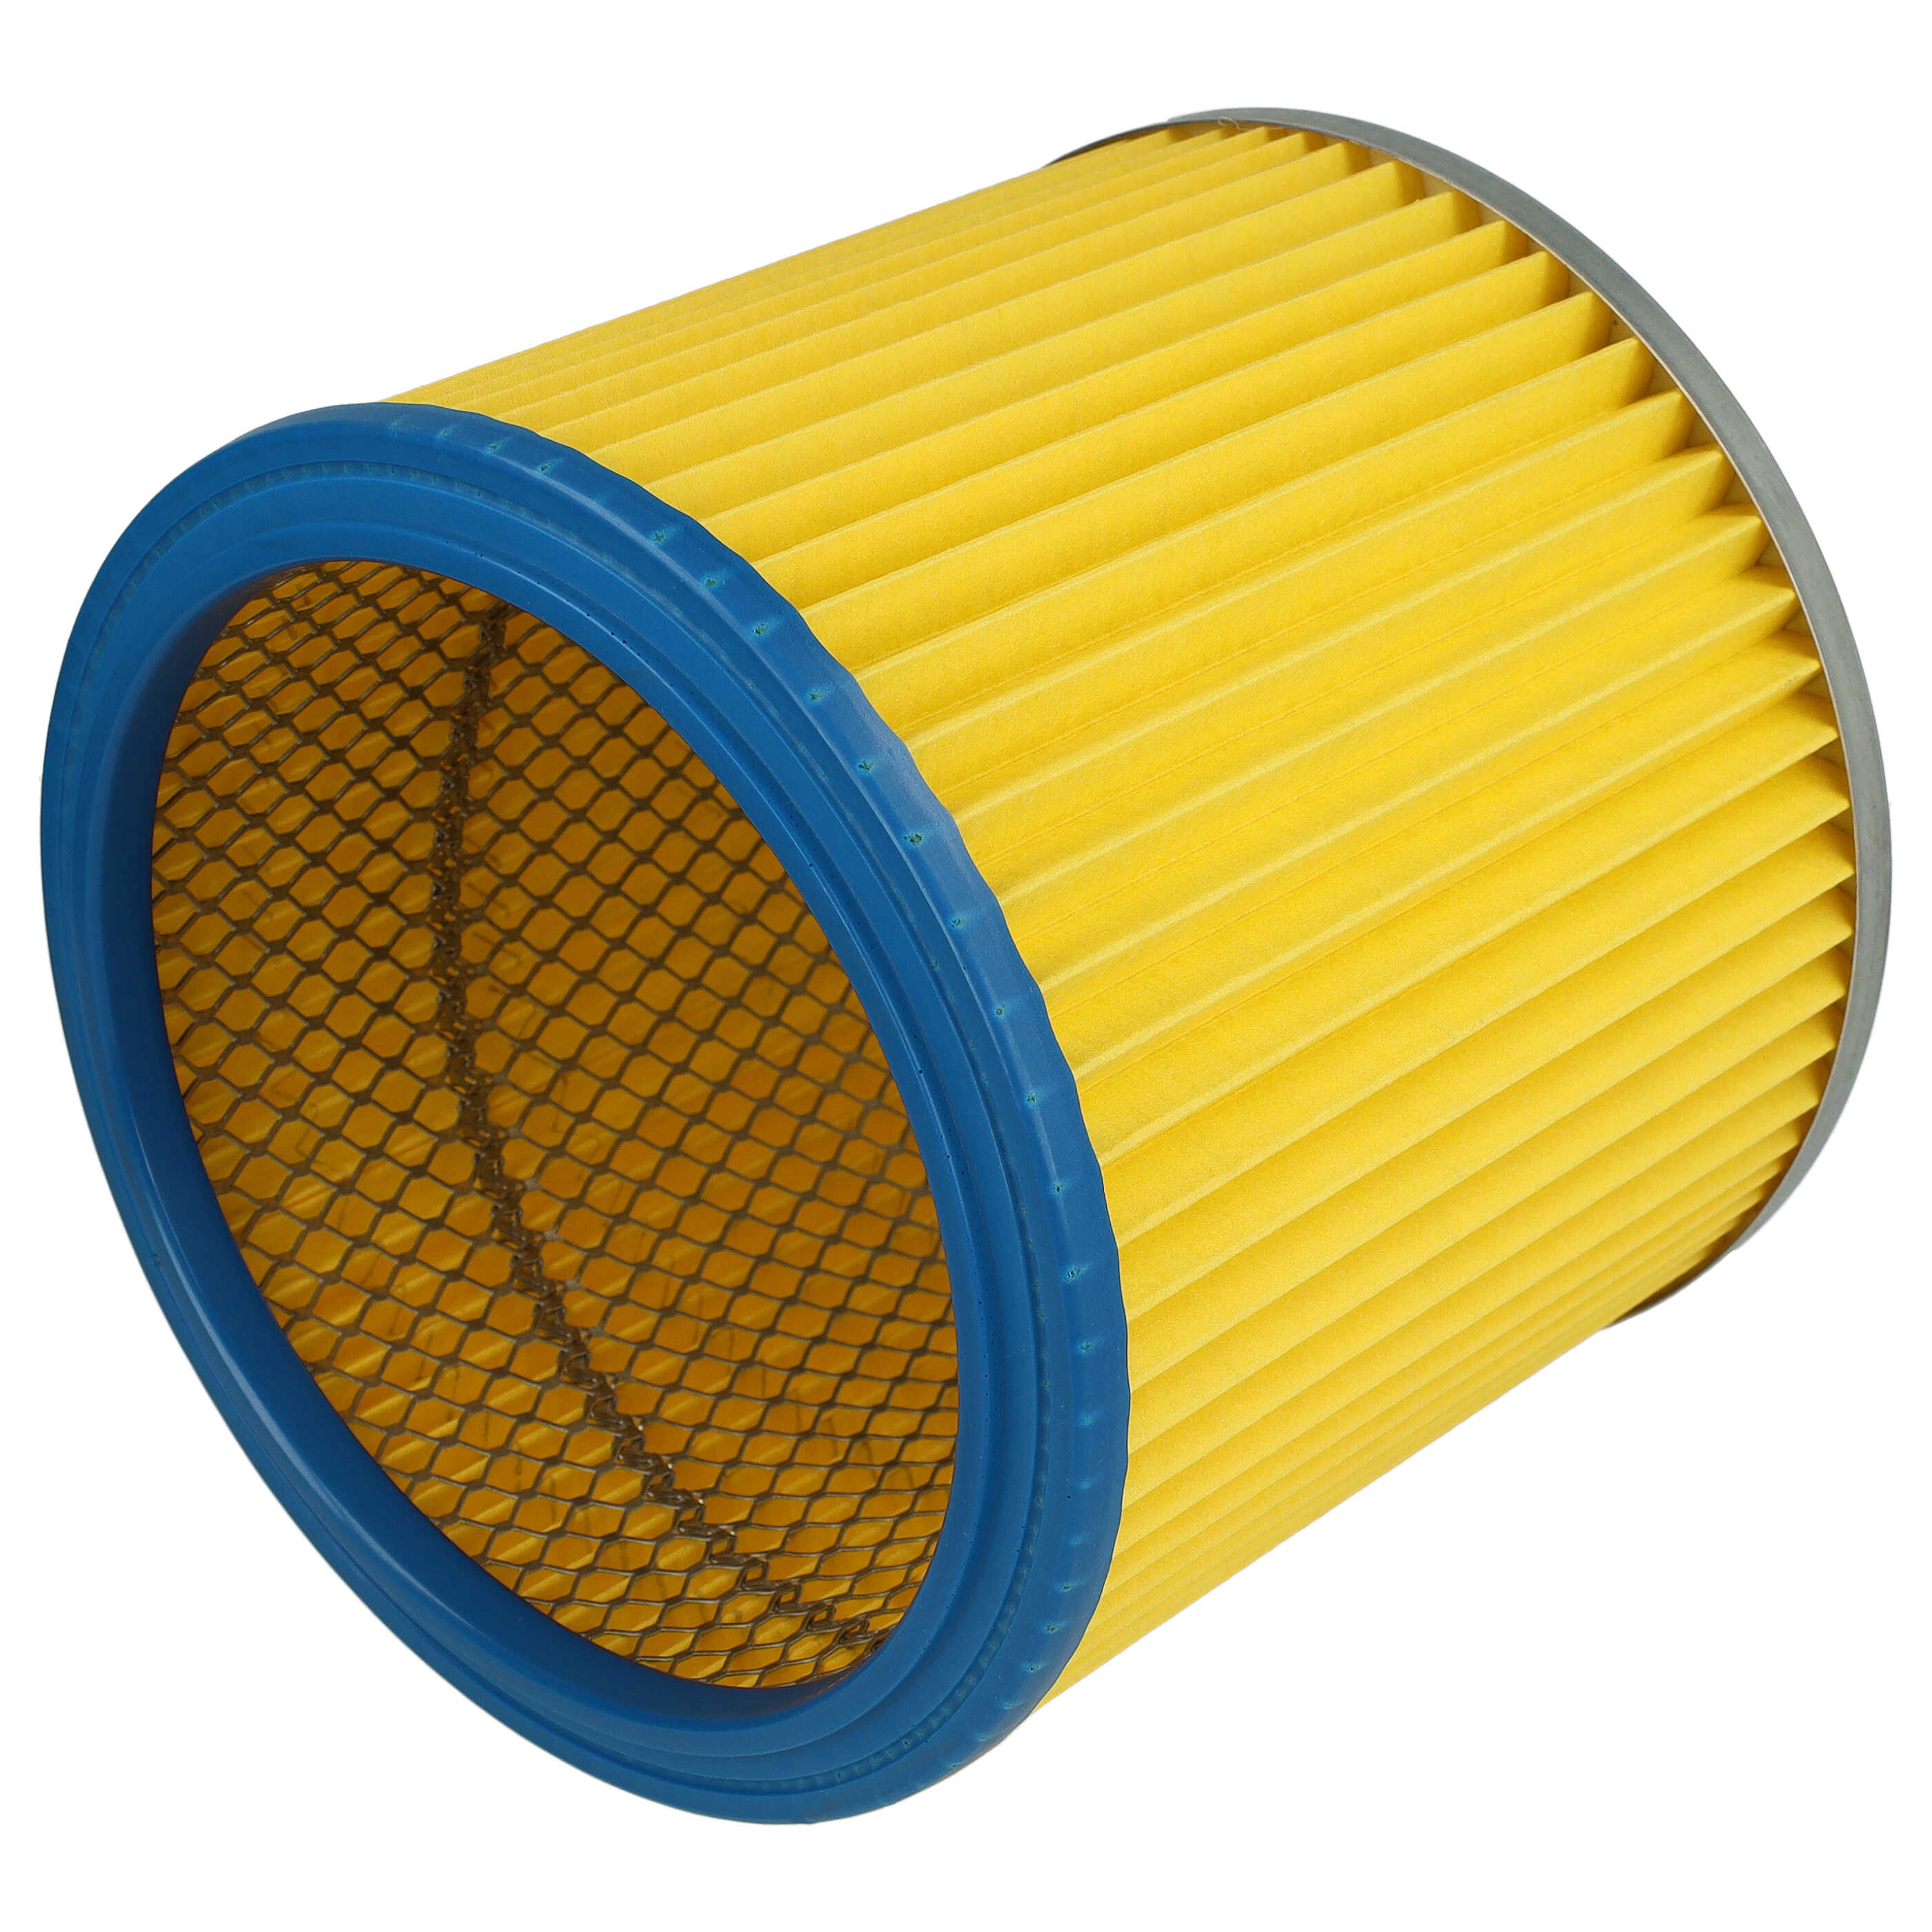 2x filter replaces Einhell 2351110 for GüdeVacuum Cleaner, blue / yellow